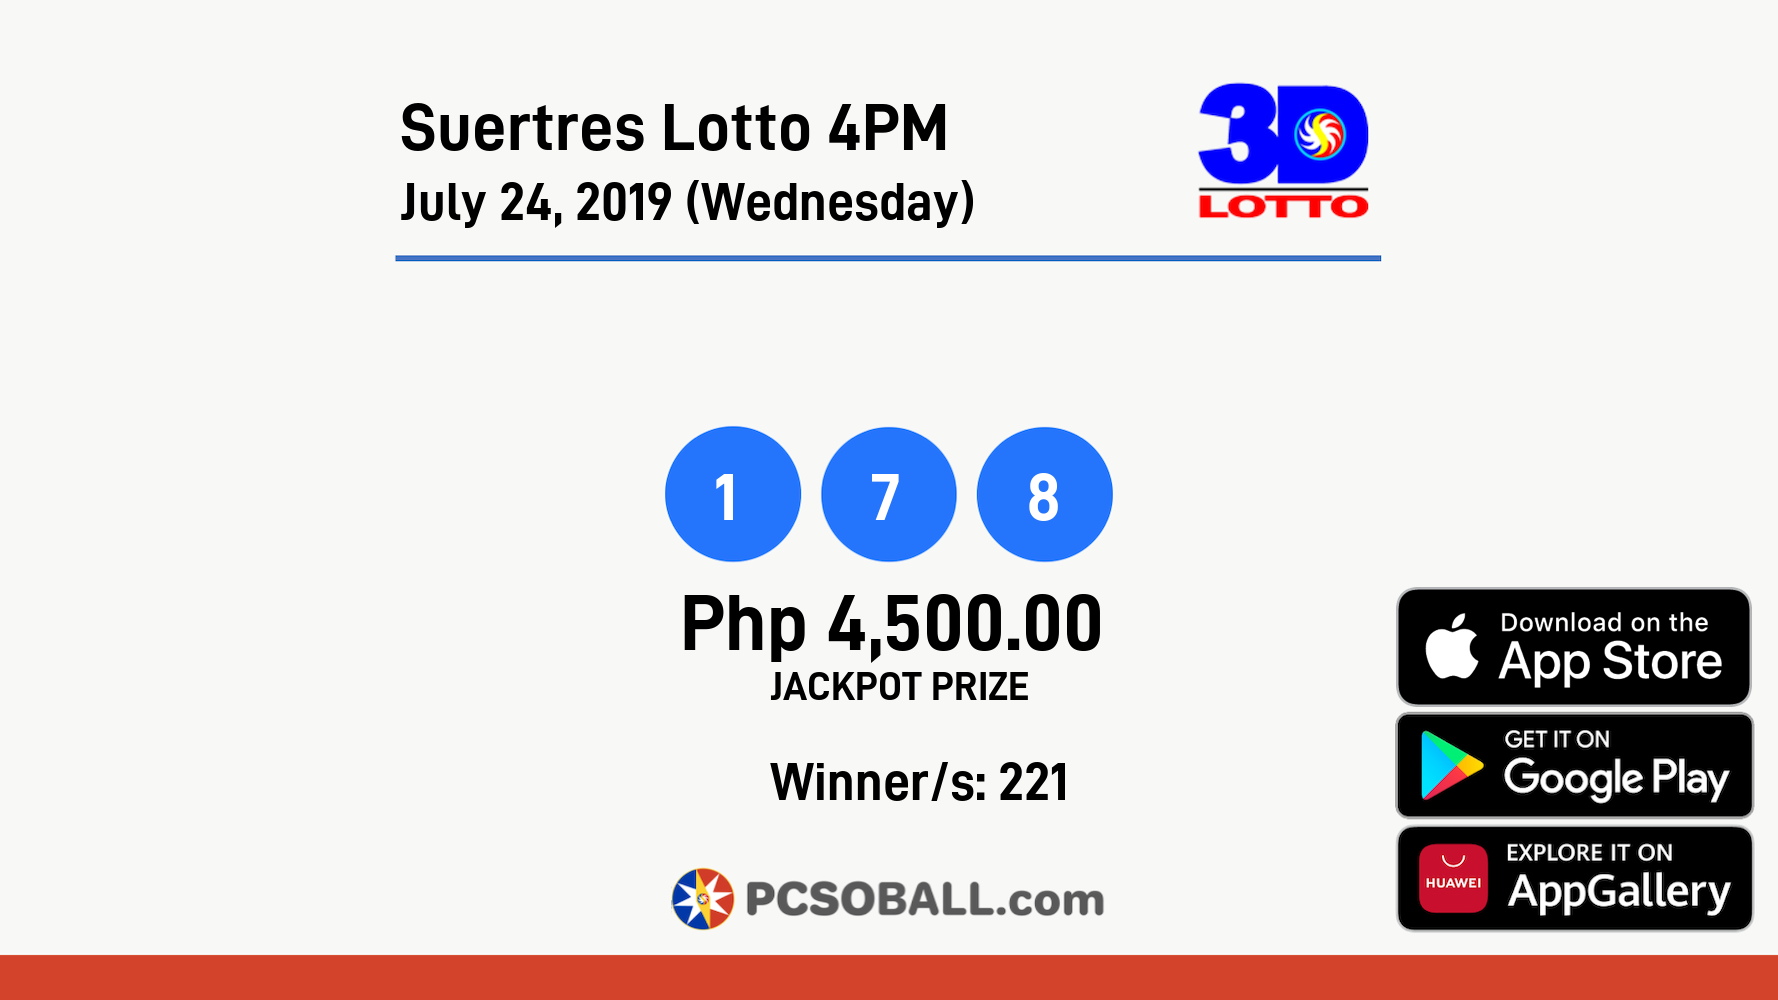 Suertres Lotto 4PM July 24, 2019 (Wednesday) Result